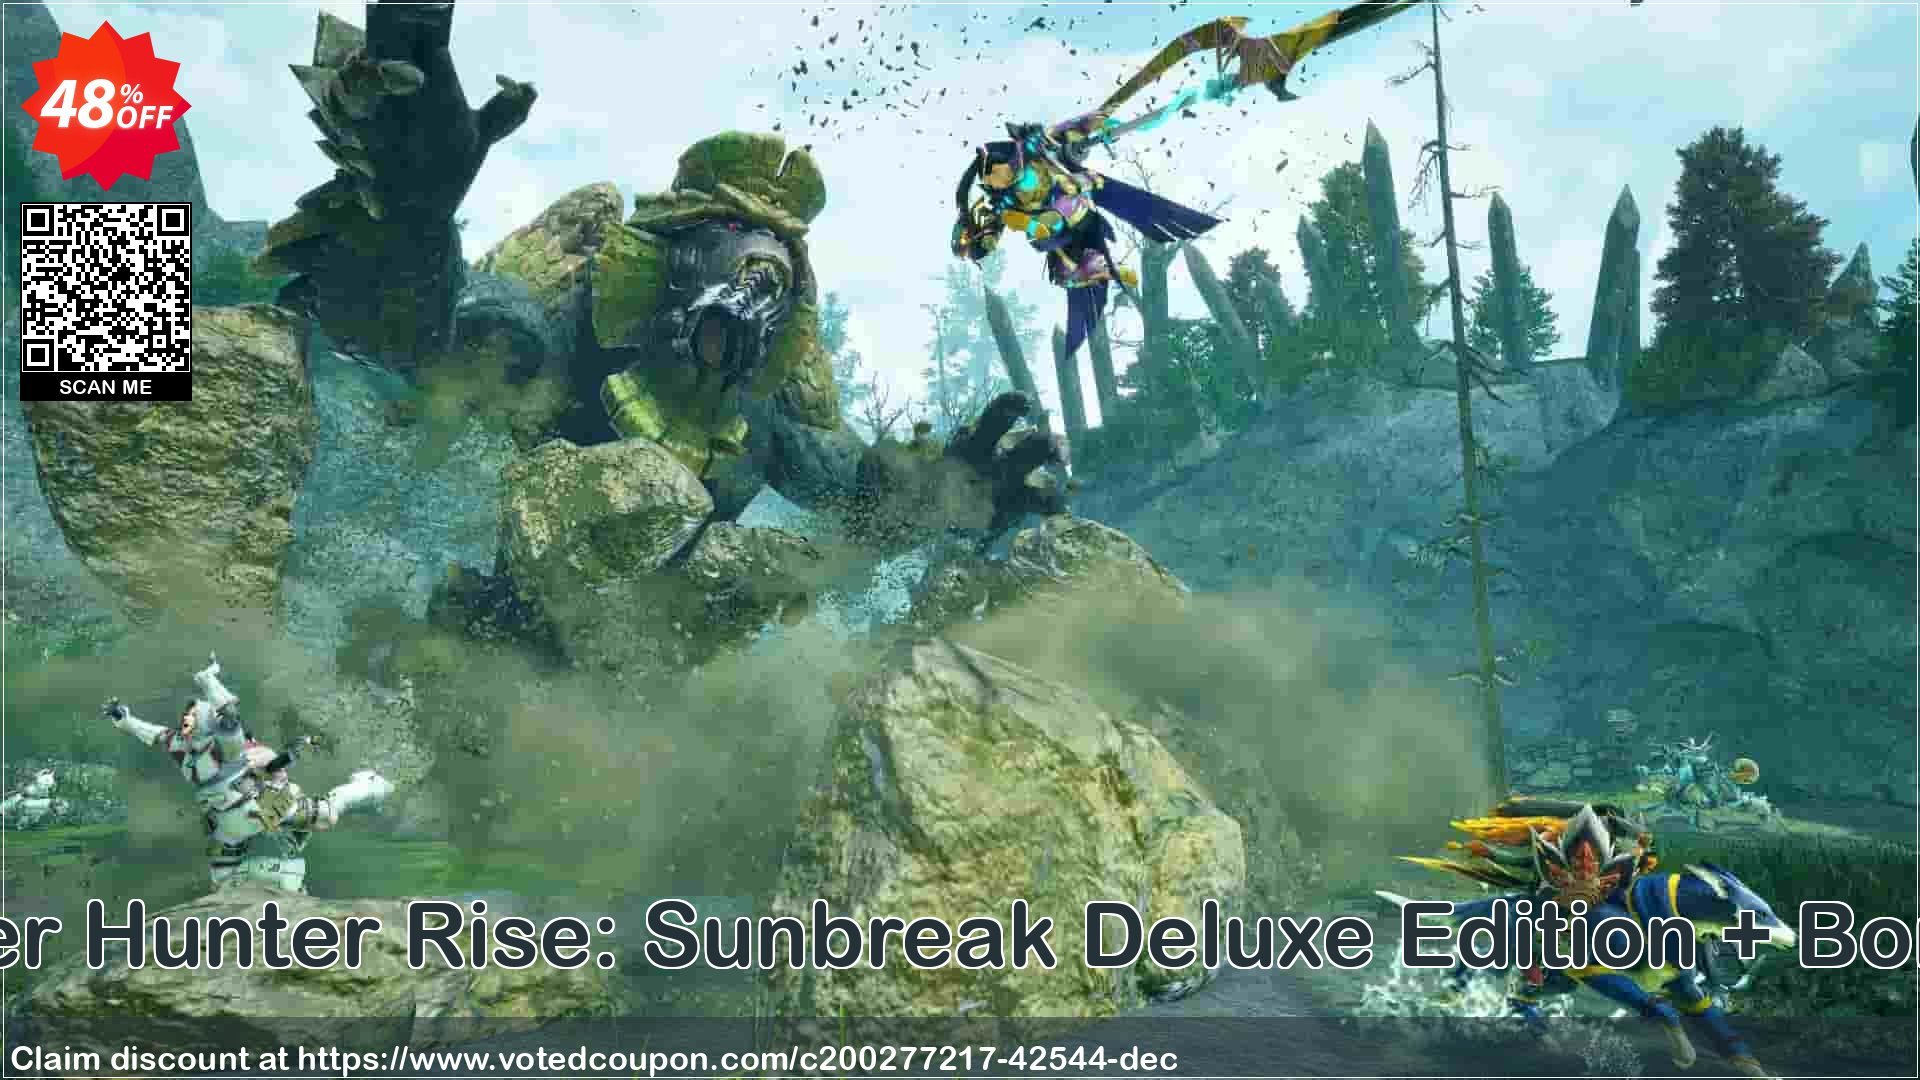 Monster Hunter Rise: Sunbreak Deluxe Edition + Bonus PC Coupon Code May 2024, 48% OFF - VotedCoupon